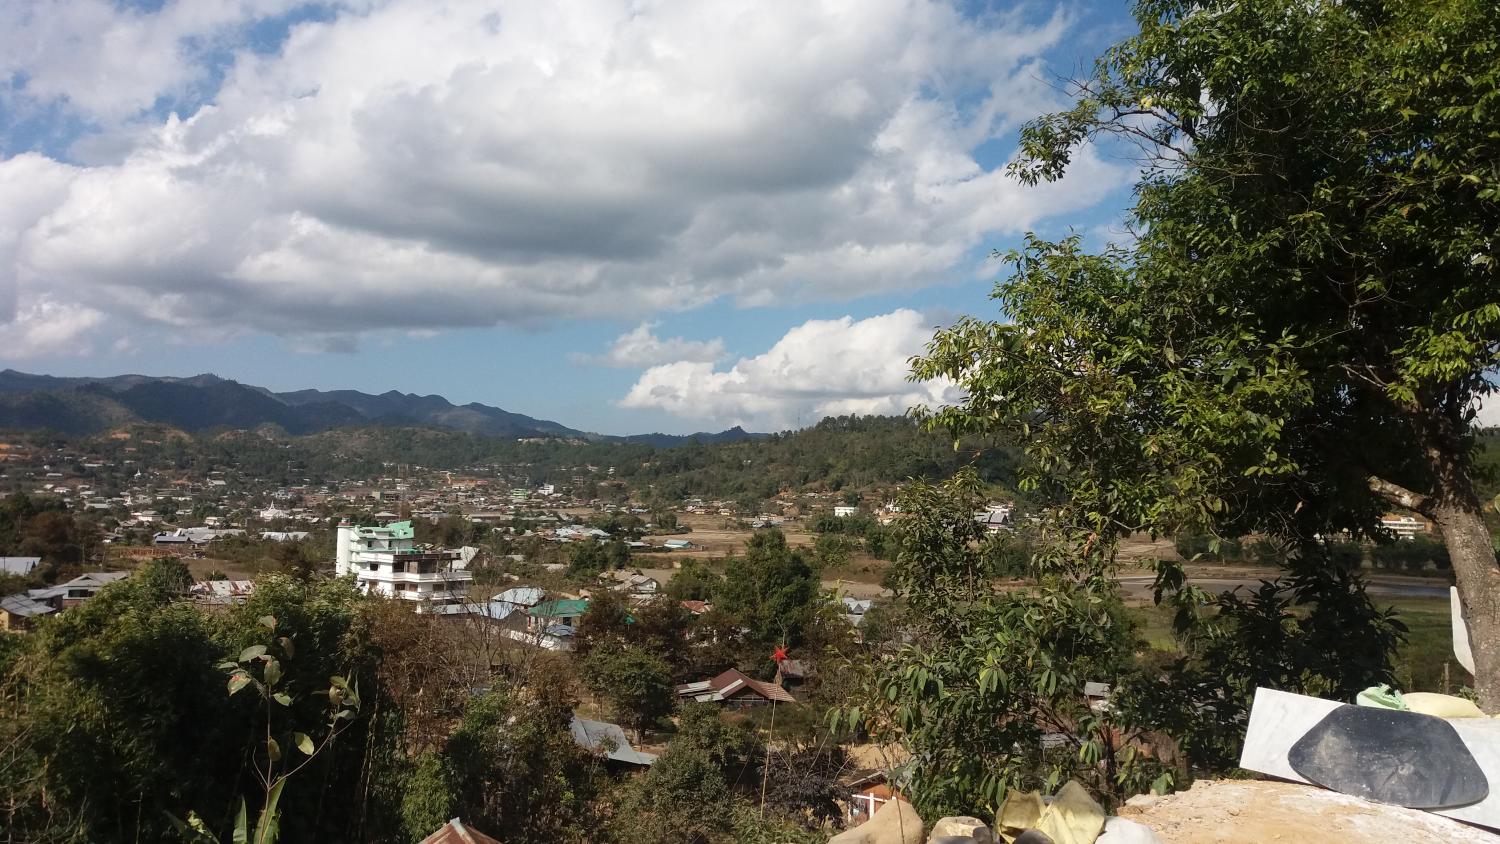 Photograph of a view of Chandel town area from Mantri Pantha village In Chandel district, Manipur.
                                                
                                                    [Sequence #]: 1 of 1
                                                